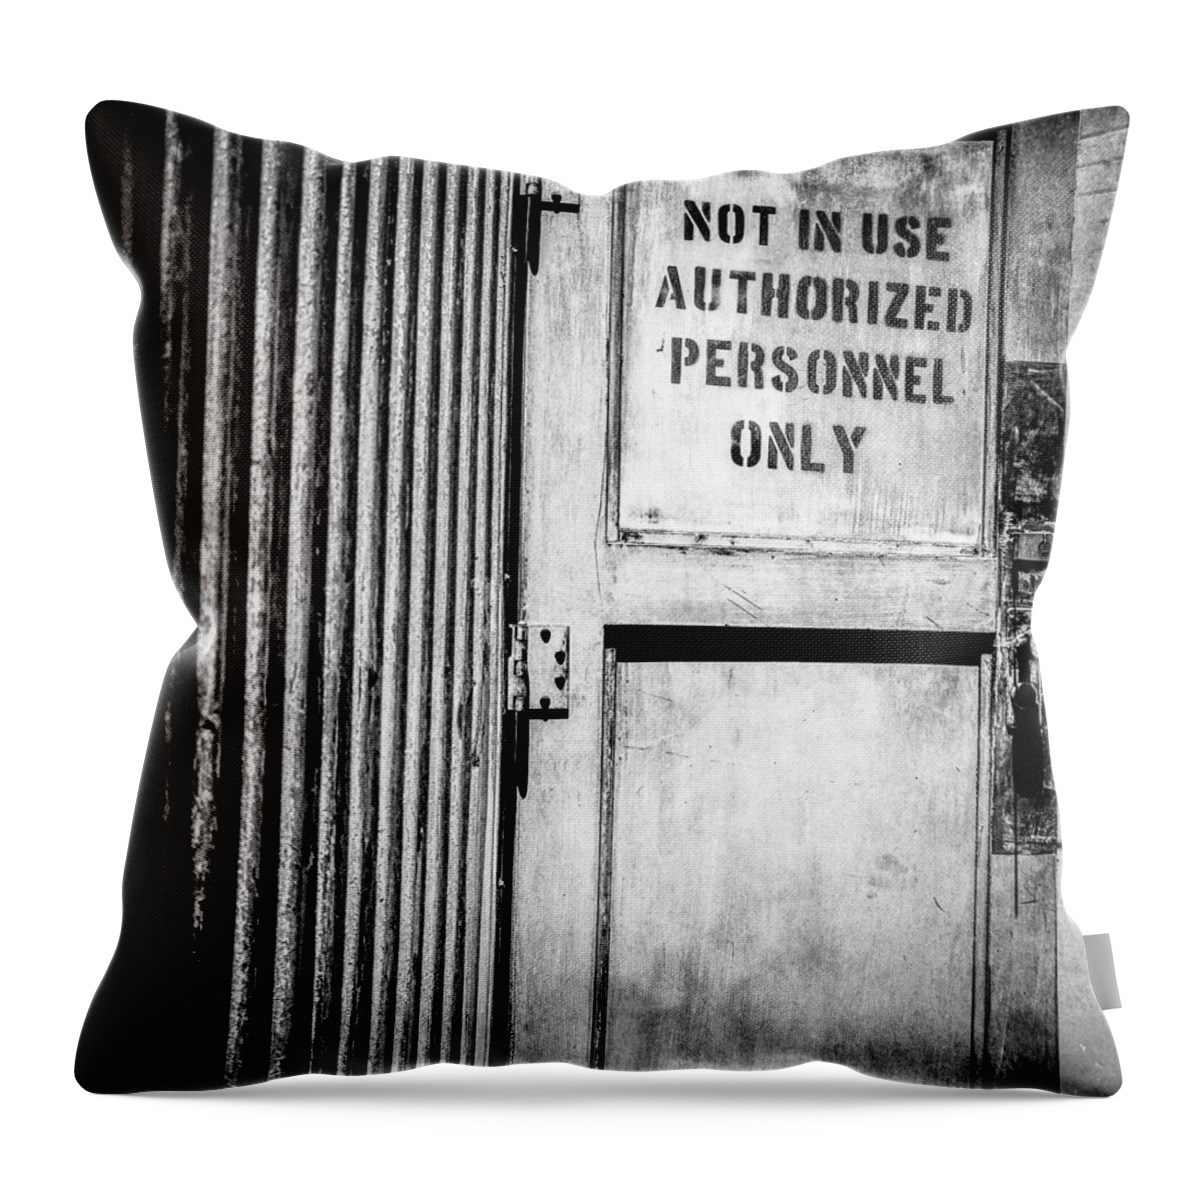 Abandoned Throw Pillow featuring the photograph Pacific Airmotive Corp 19 by YoPedro